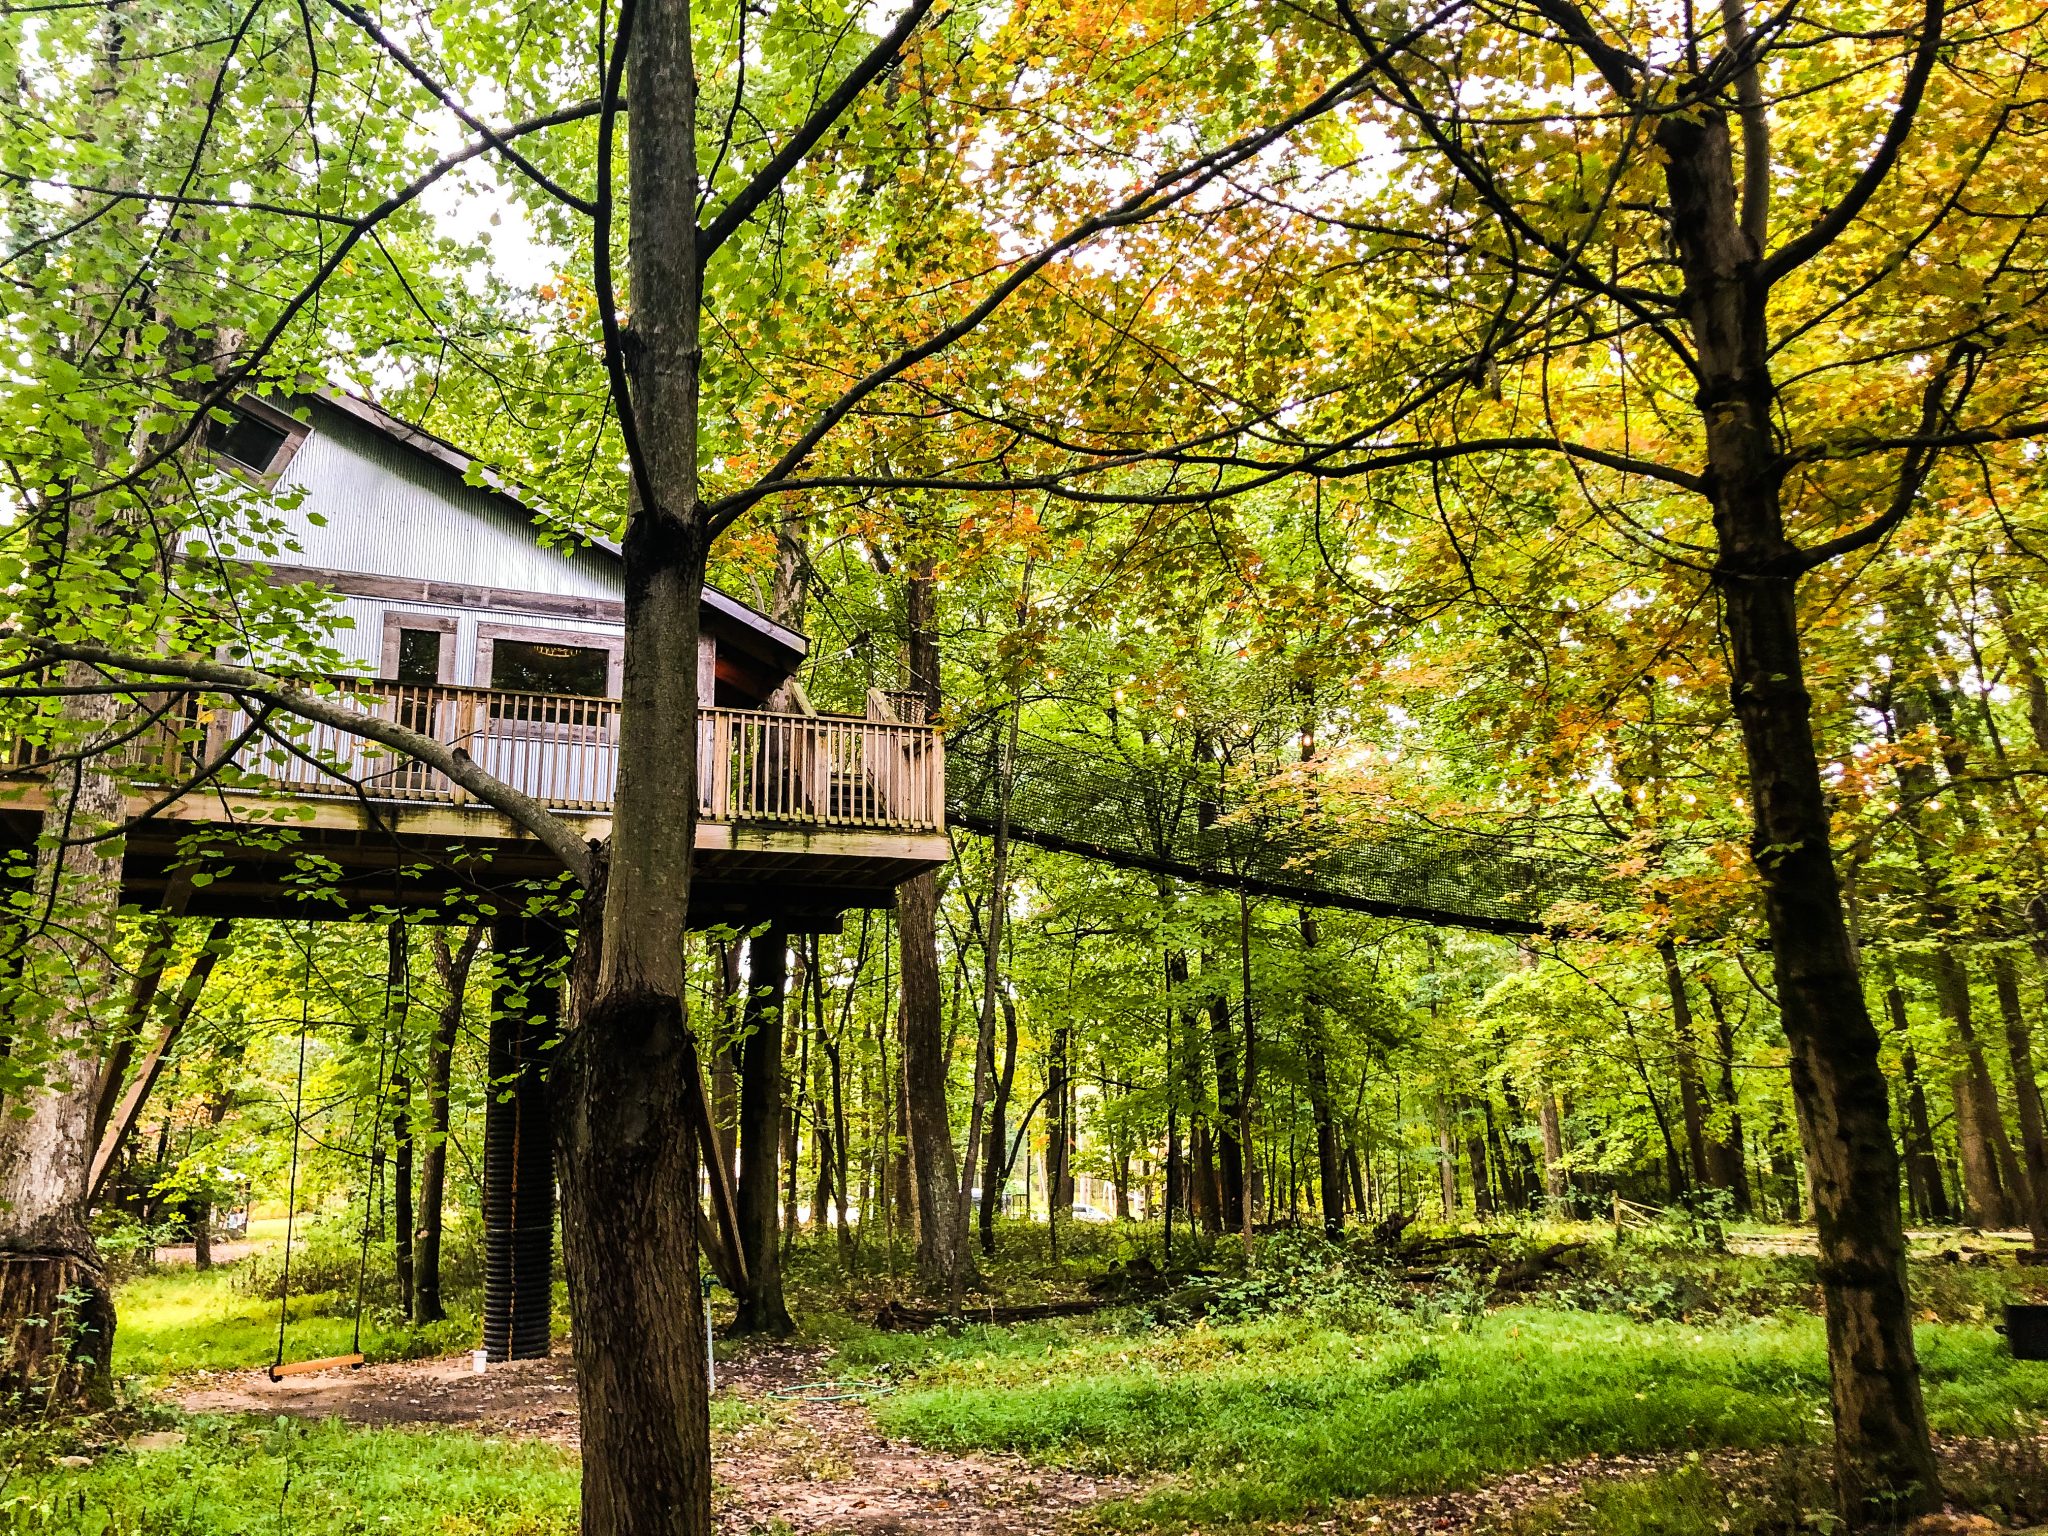 The Tin Shed at the Mohicans: A Treehouse Rental In Ohio